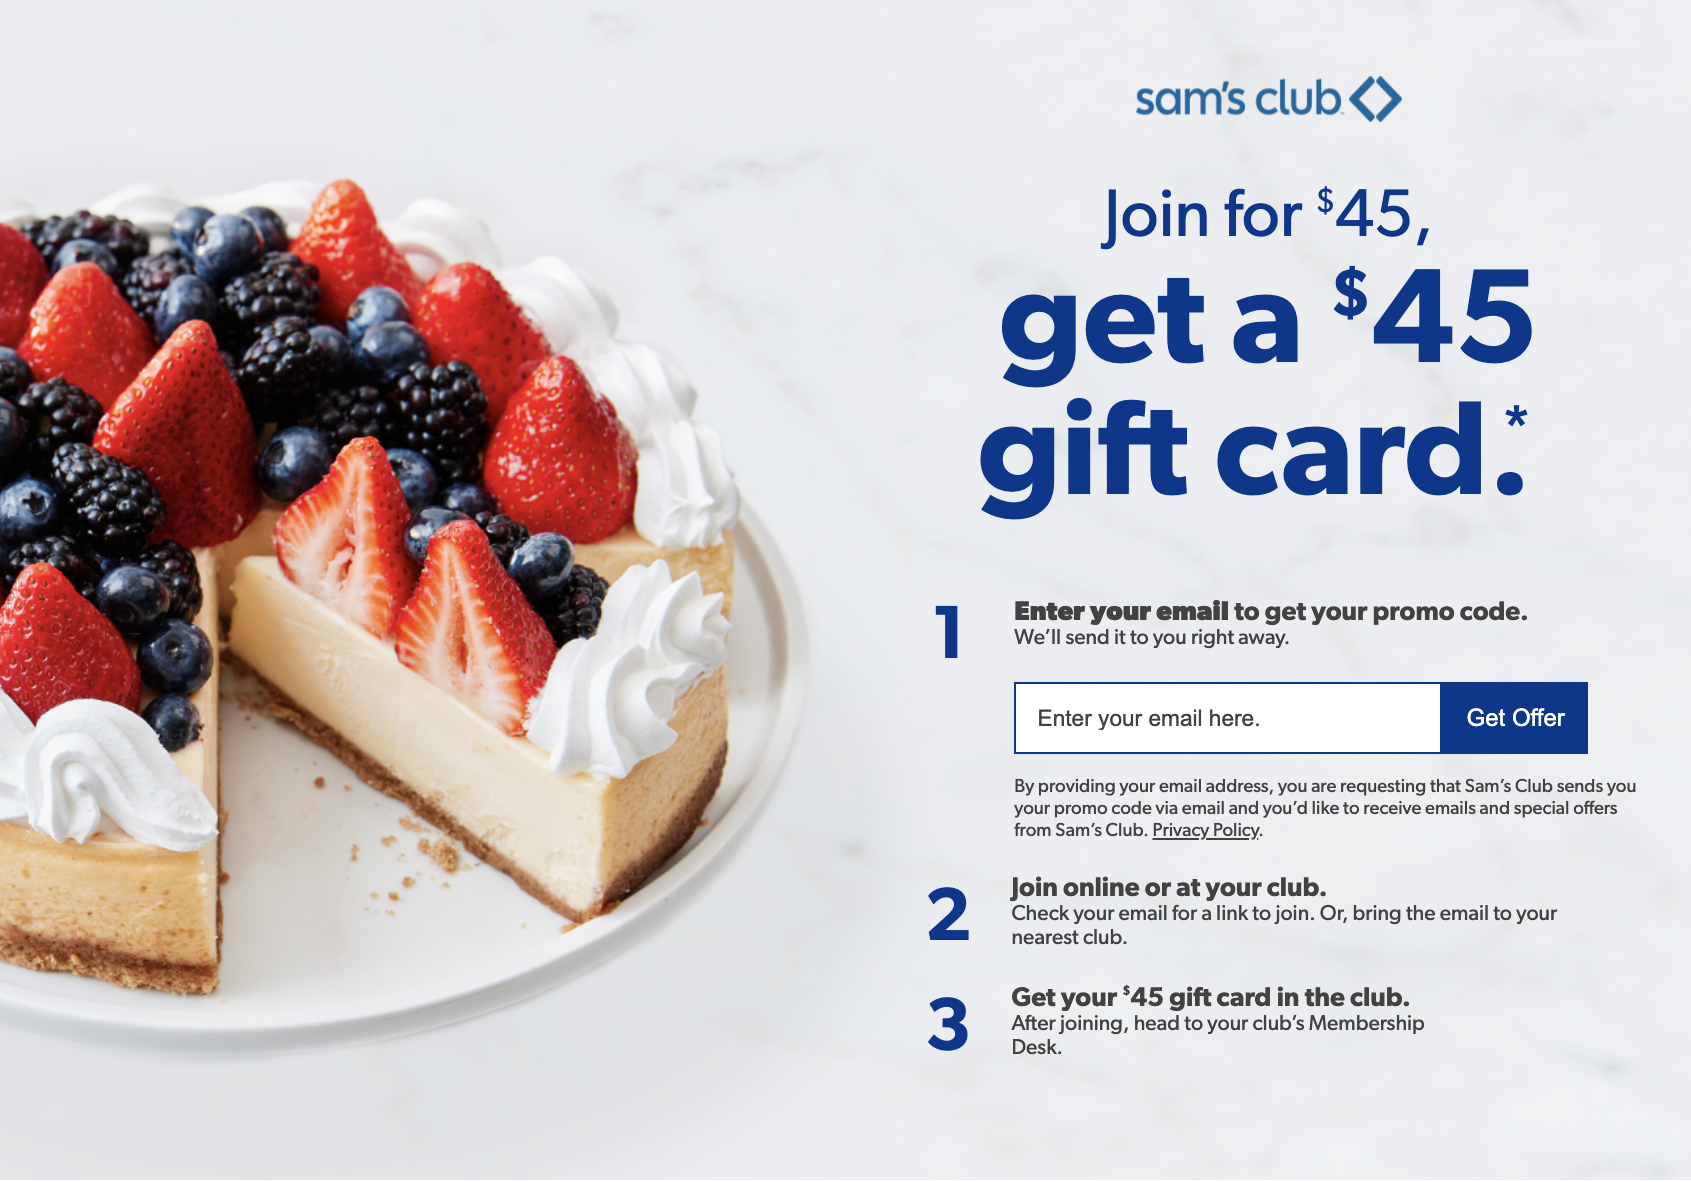 Join Sam's Club for $45 and get $45 in Savings. 